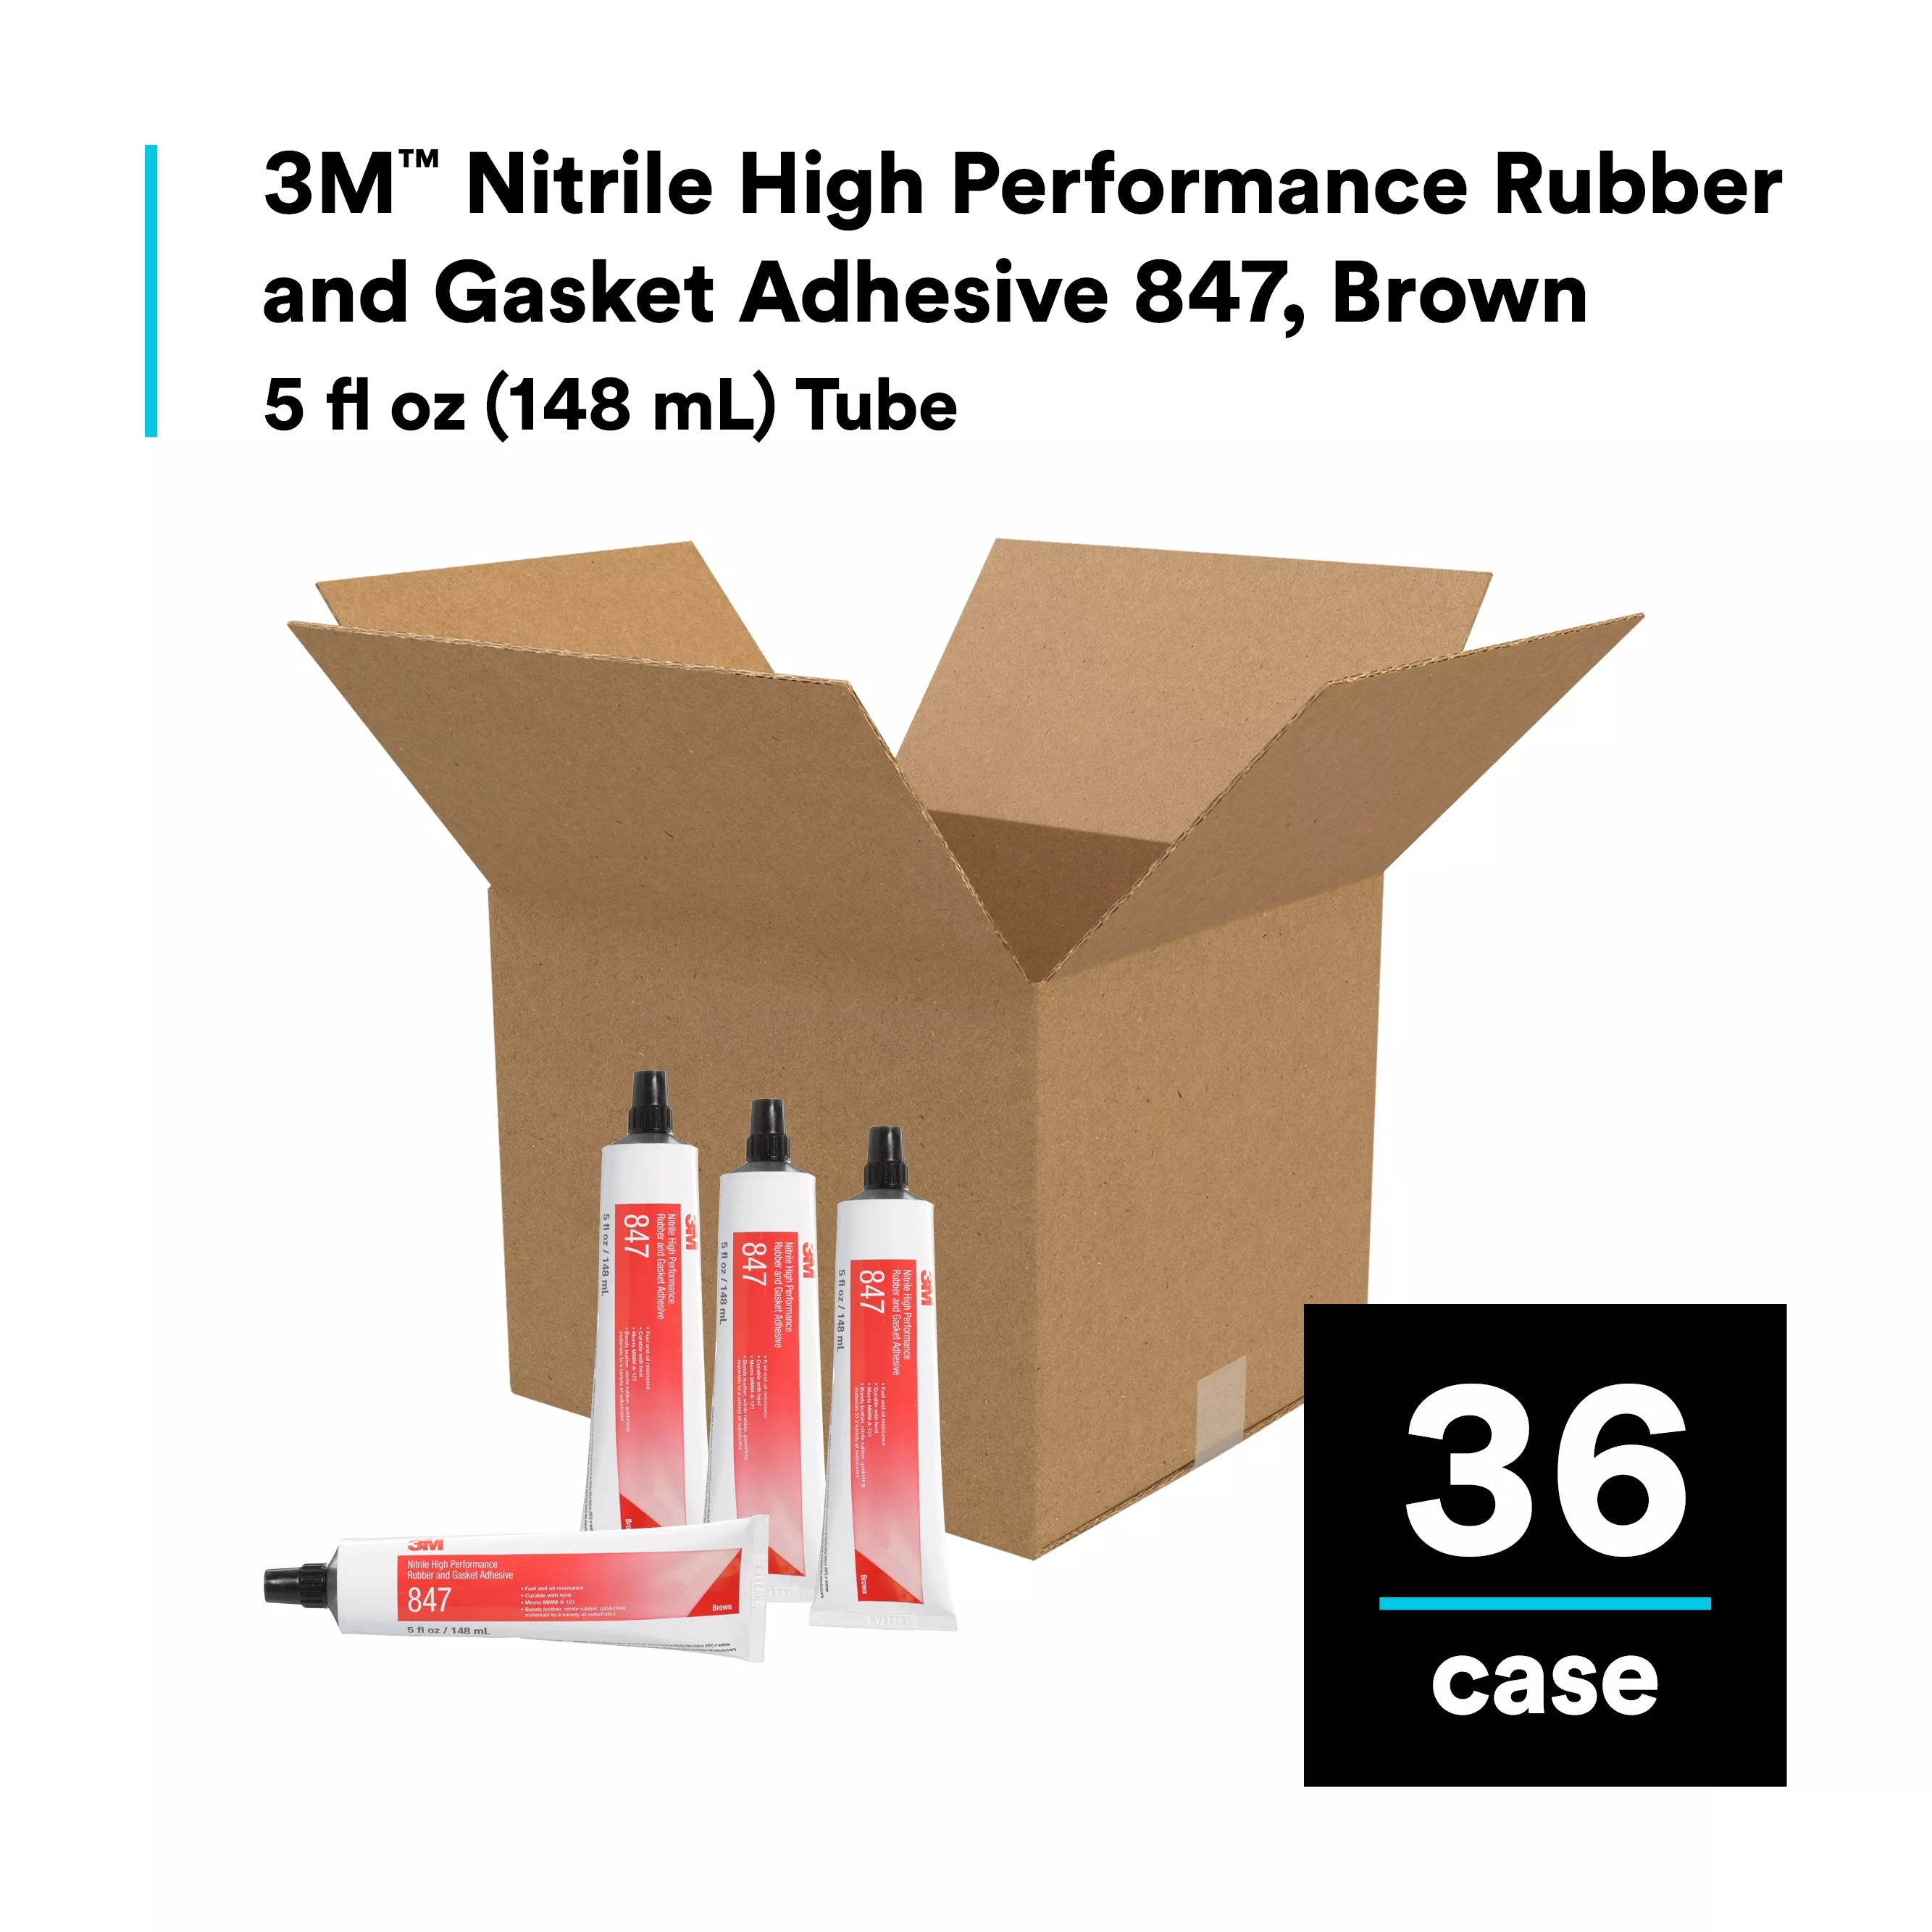 SKU 7000000794 | 3M™ Nitrile High Performance Rubber and Gasket Adhesive 847